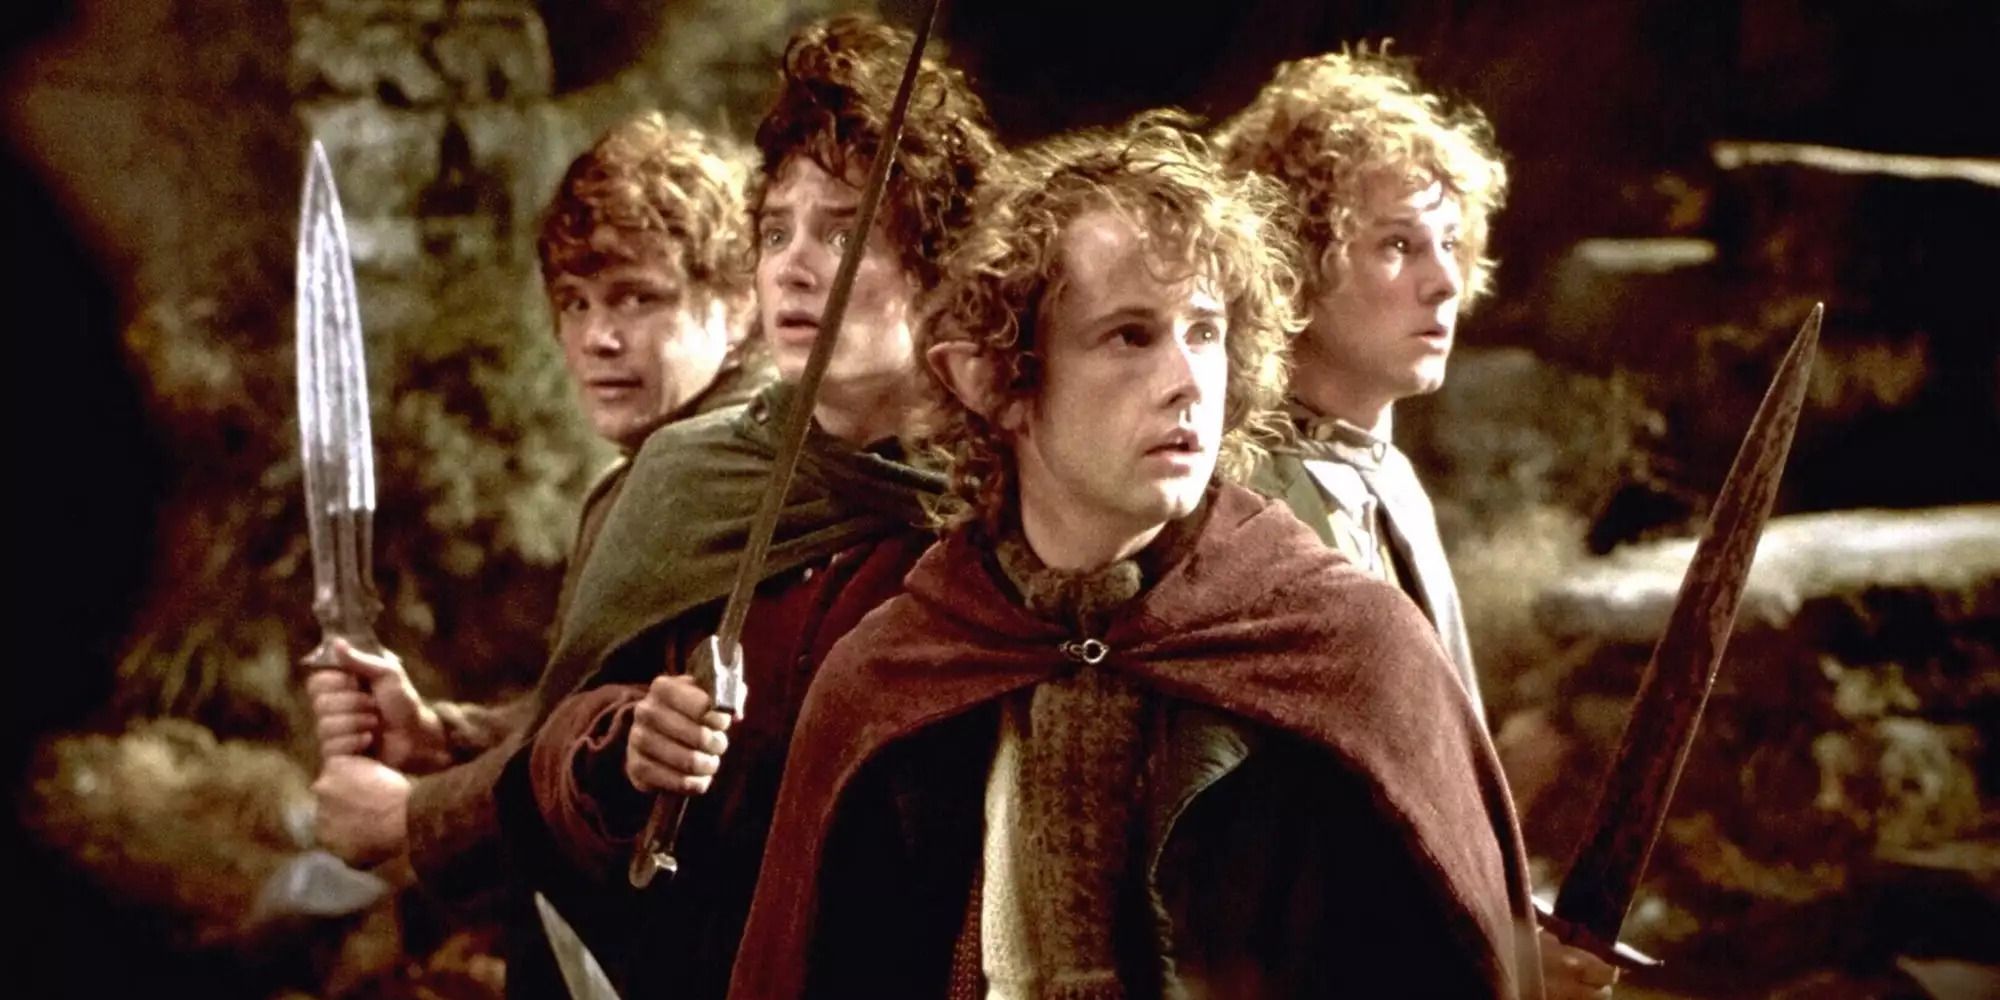 Hobbits Frodo, Sam, Merry and Pippin holding swords on Weathertop in 'The Lord of the Rings: The Fellowship of the Ring'